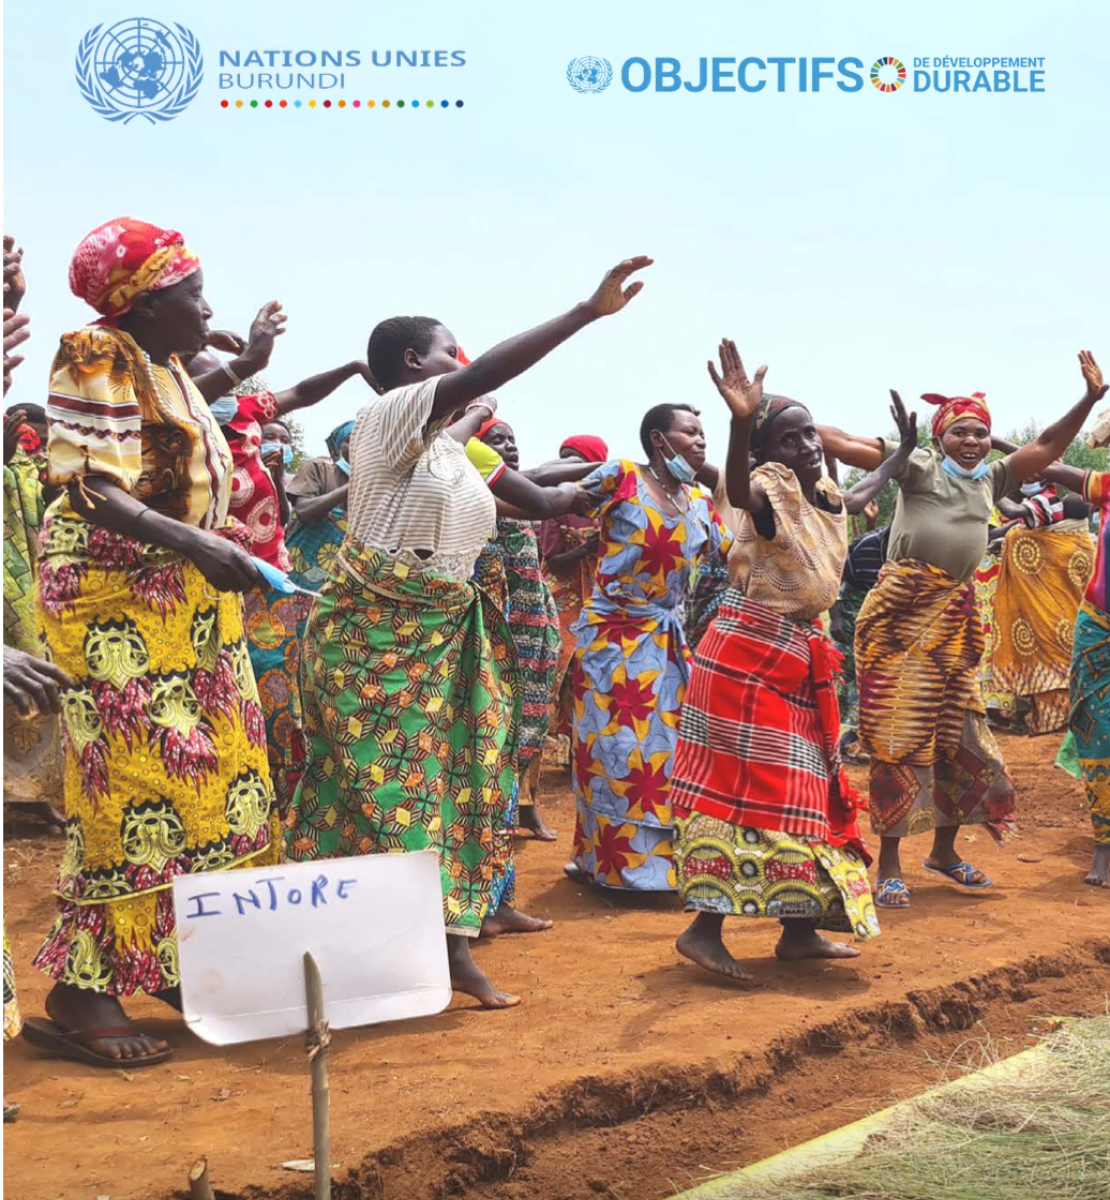 Publication cover featuring women in traditional clothes dancing in a field.